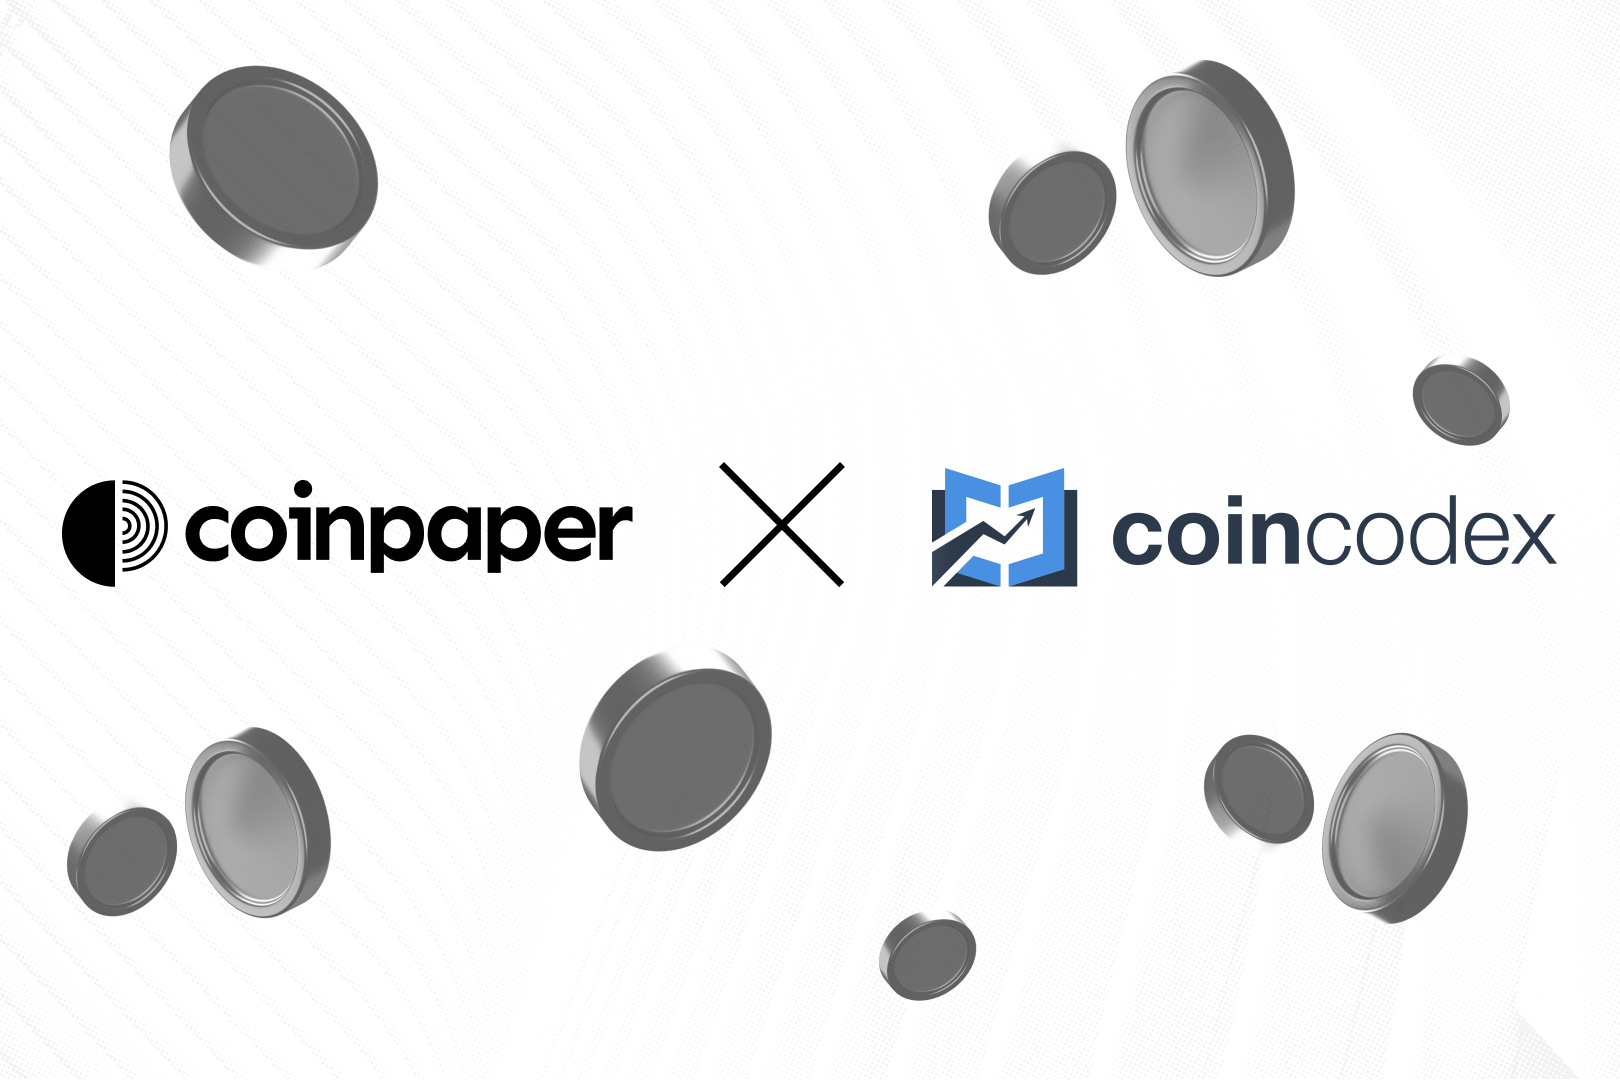 CoinCodex x Coinpaper logos on white background with silver coins